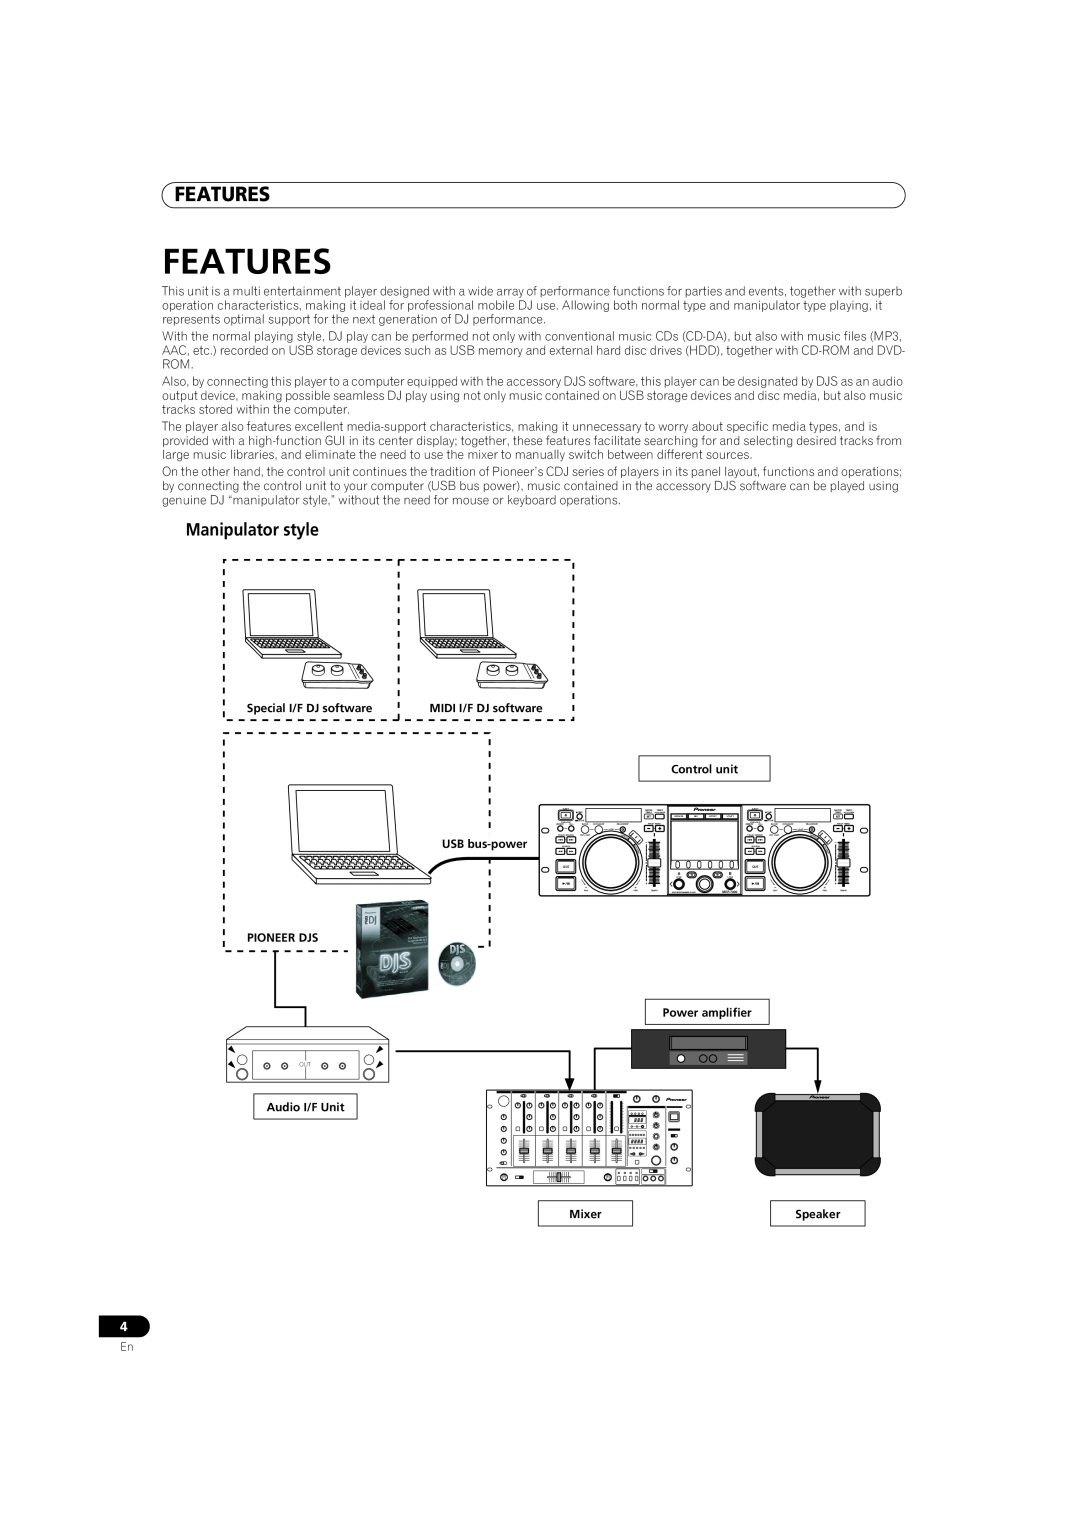 Pioneer MEP-7000 operating instructions Features, Manipulator style 